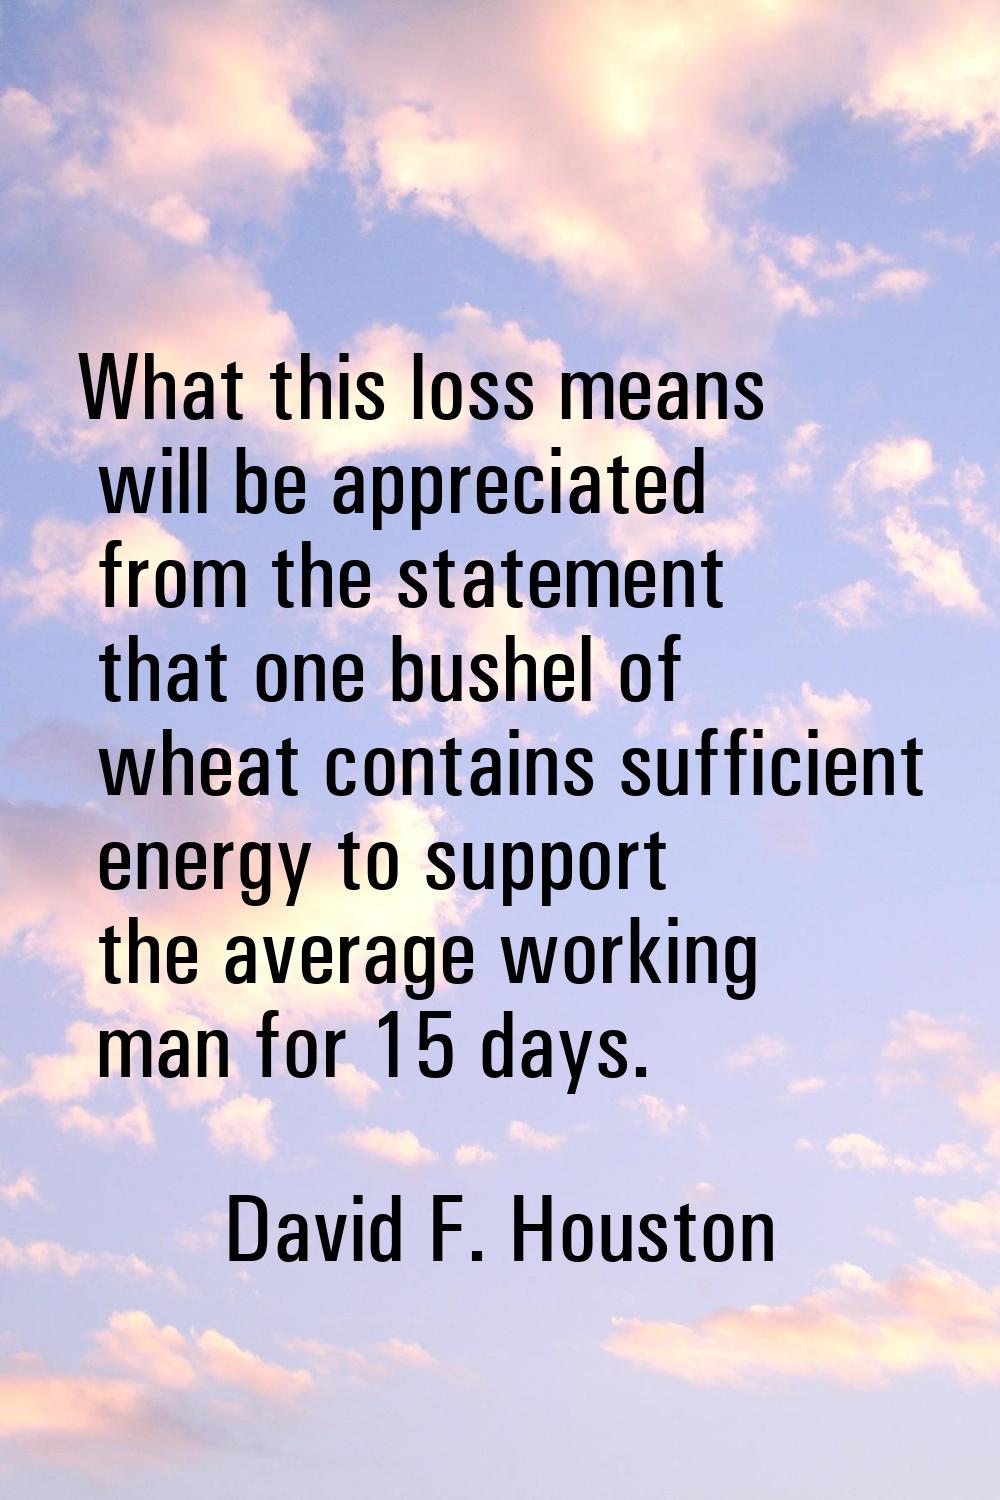 What this loss means will be appreciated from the statement that one bushel of wheat contains suffi